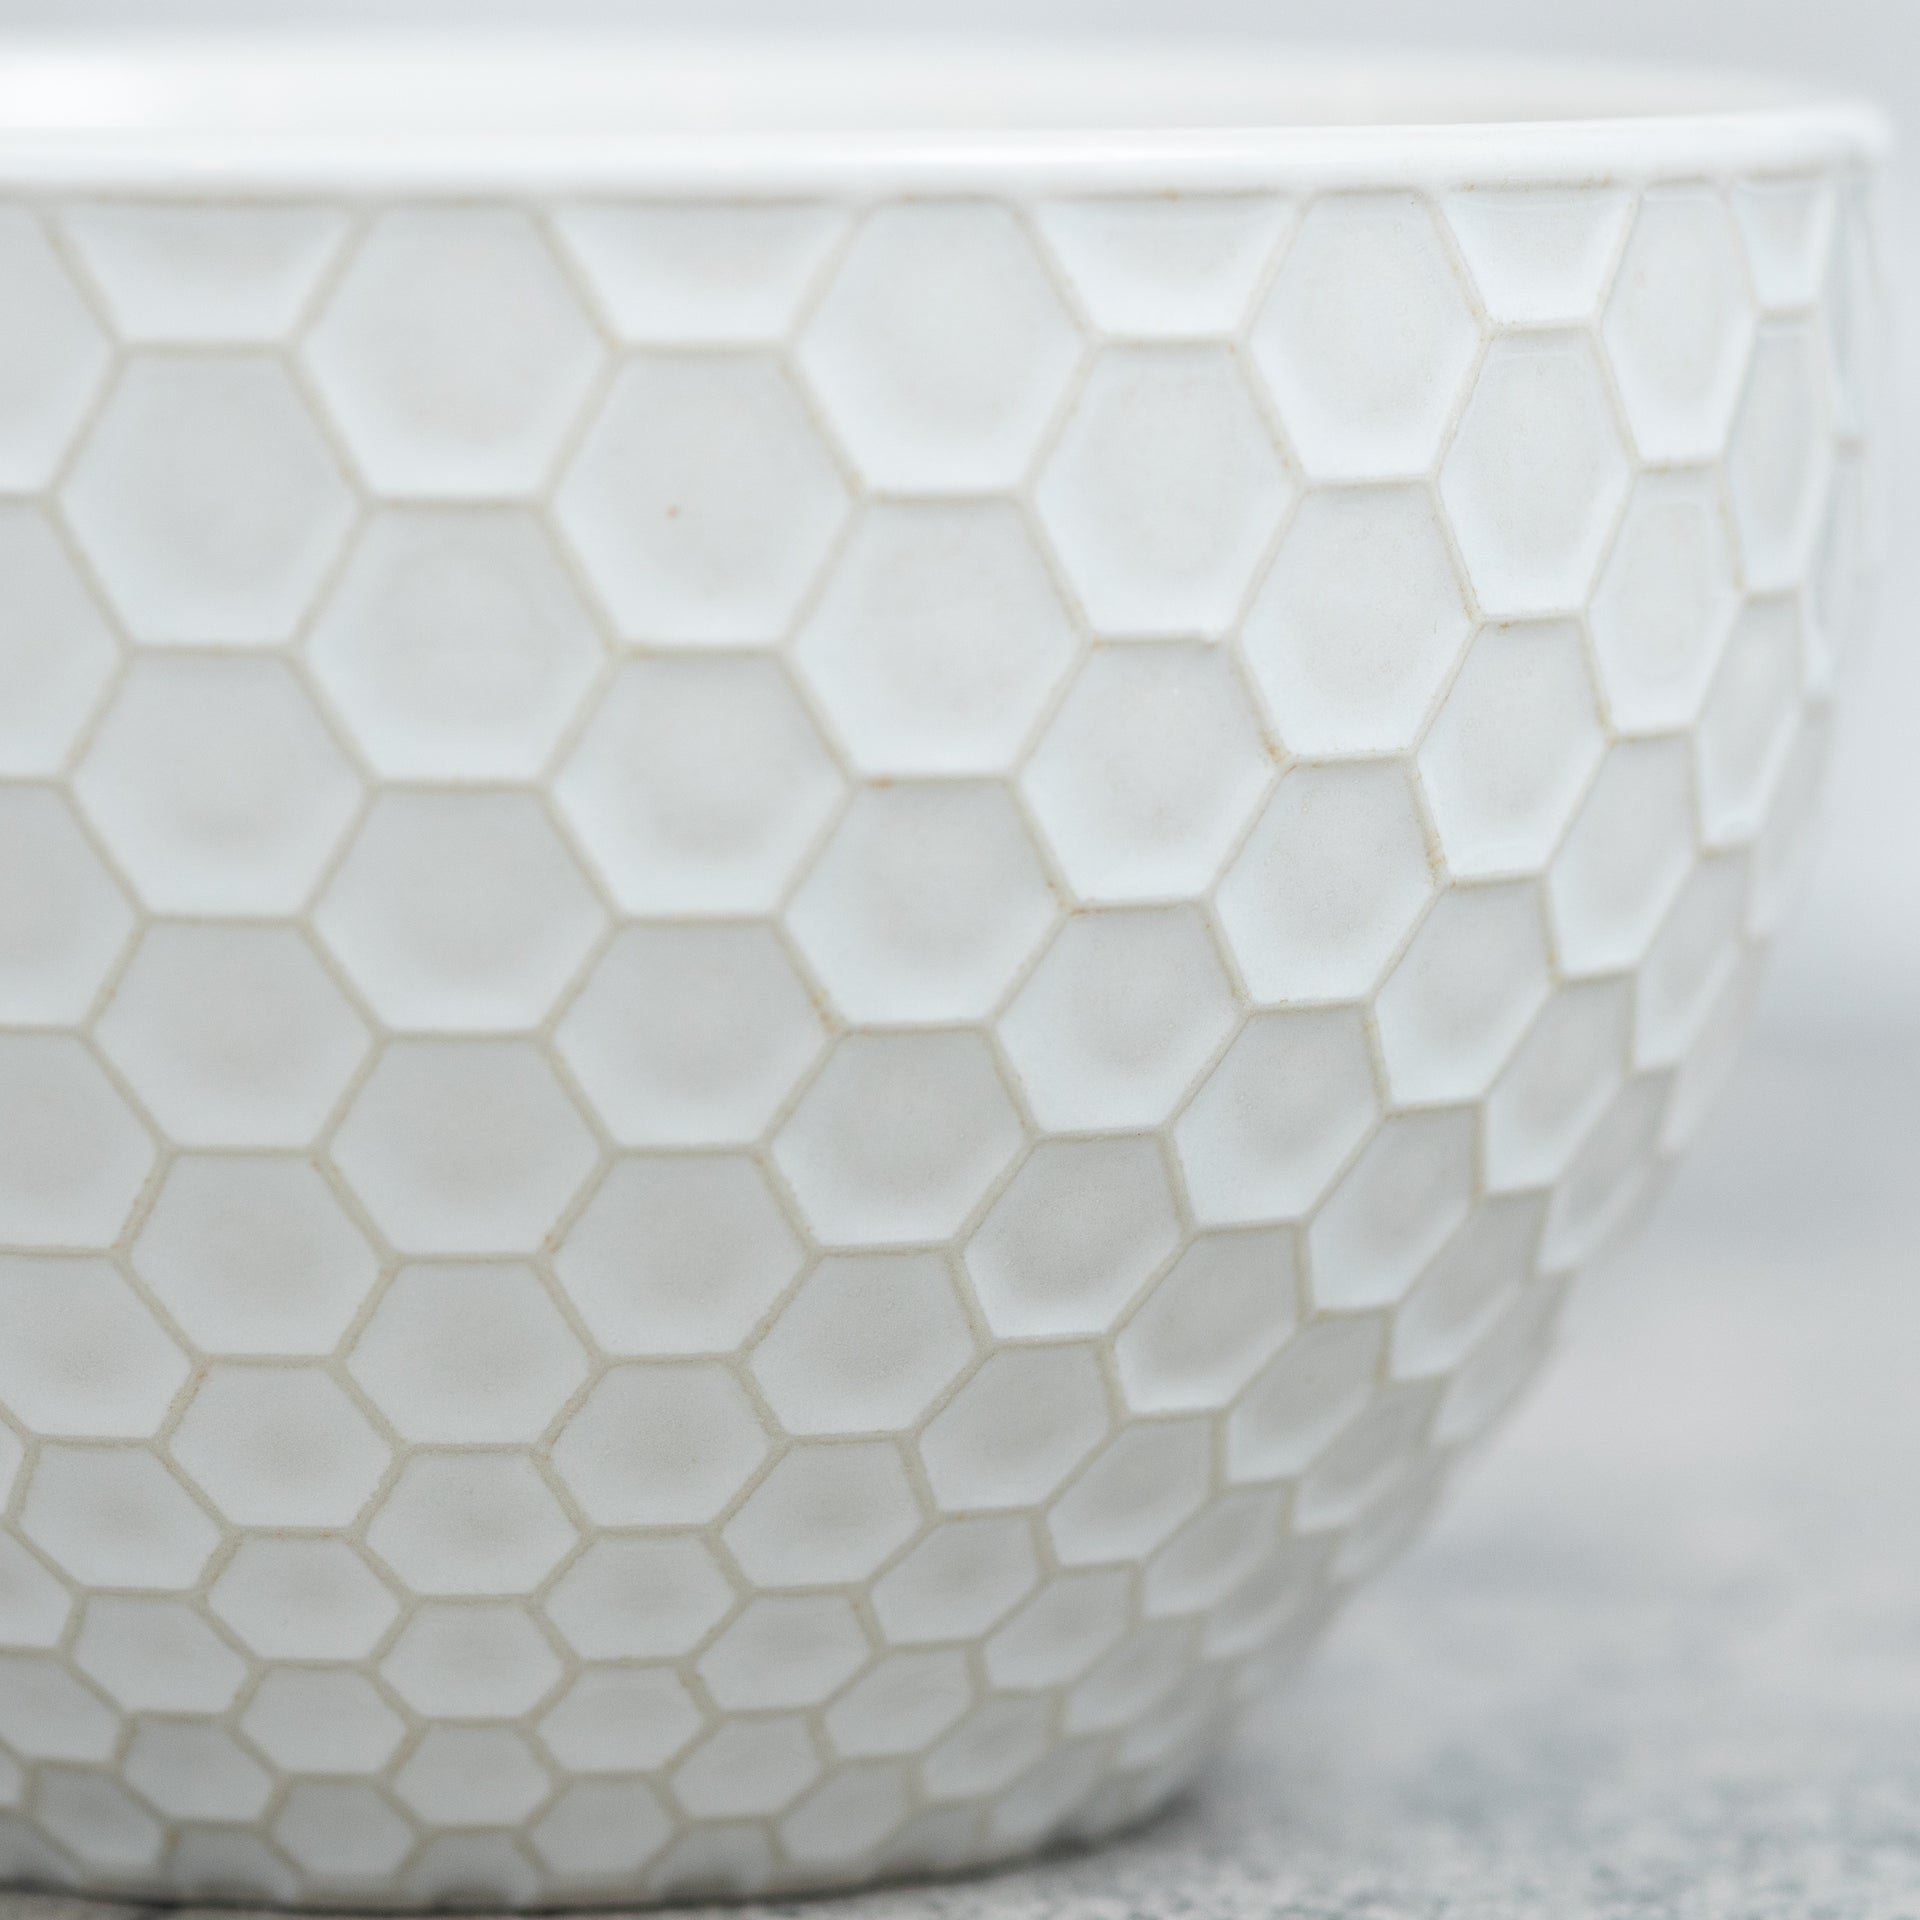 Patterned 5" Bowl  PD Home Honeycomb  